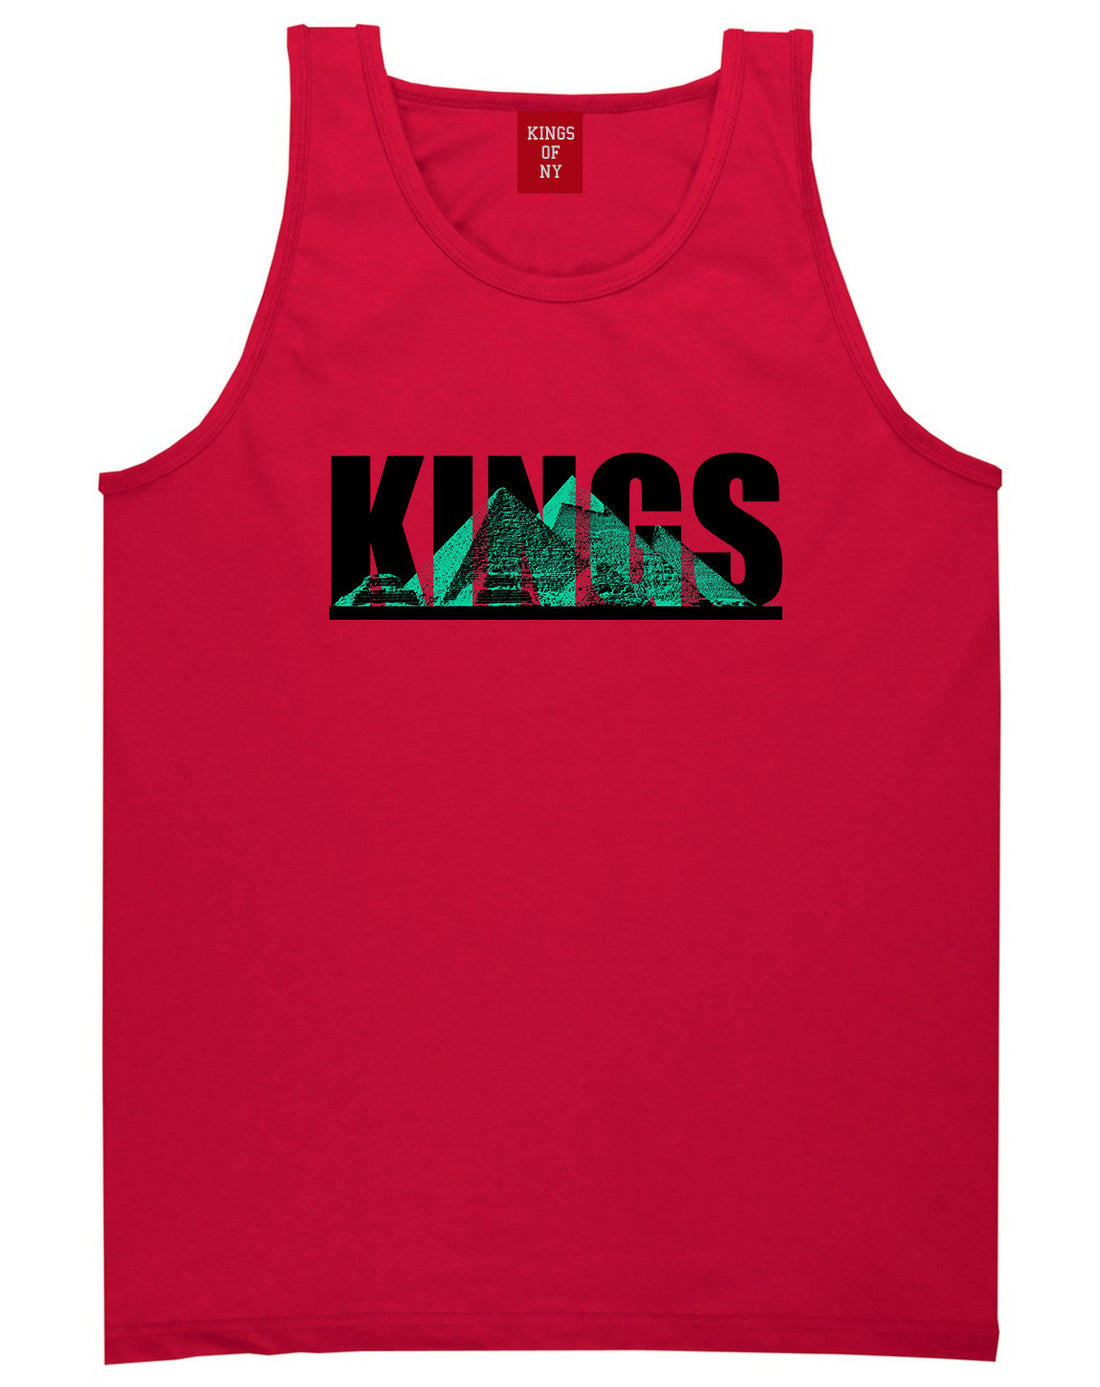 Giza Egyptian Pyramids Tank Top in Red